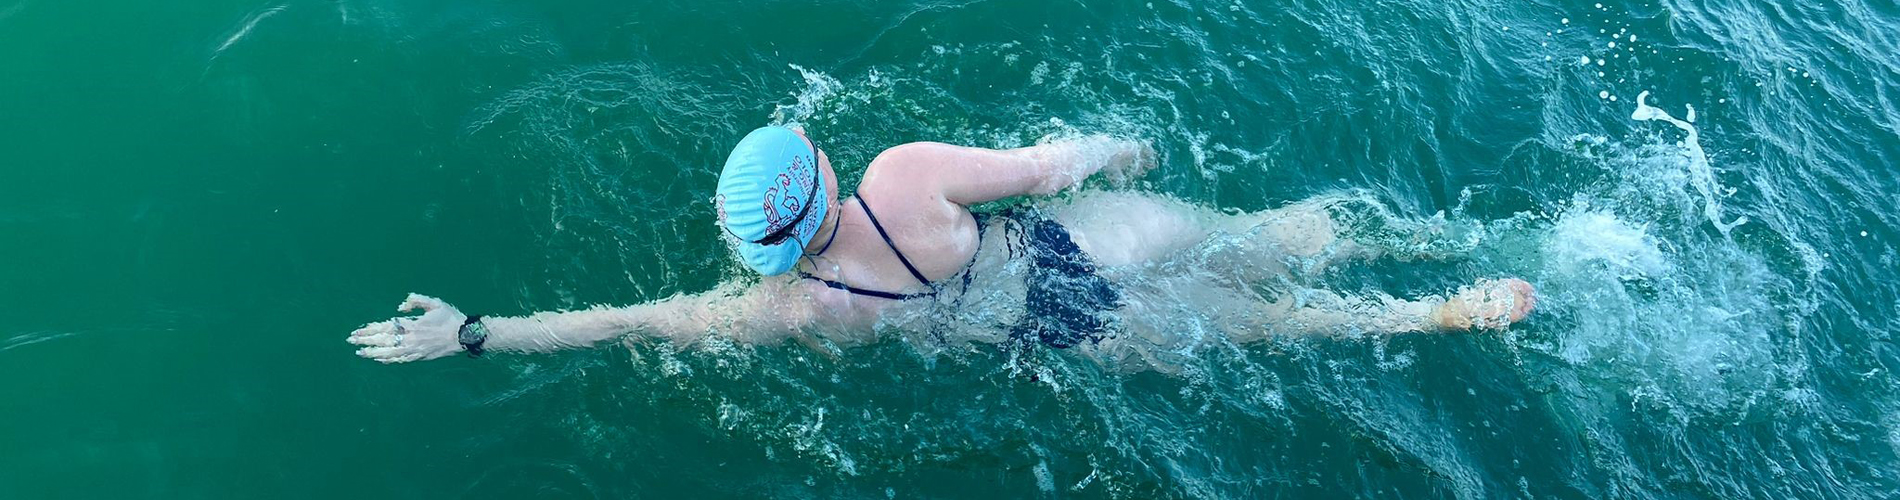 Swimmer in the channel